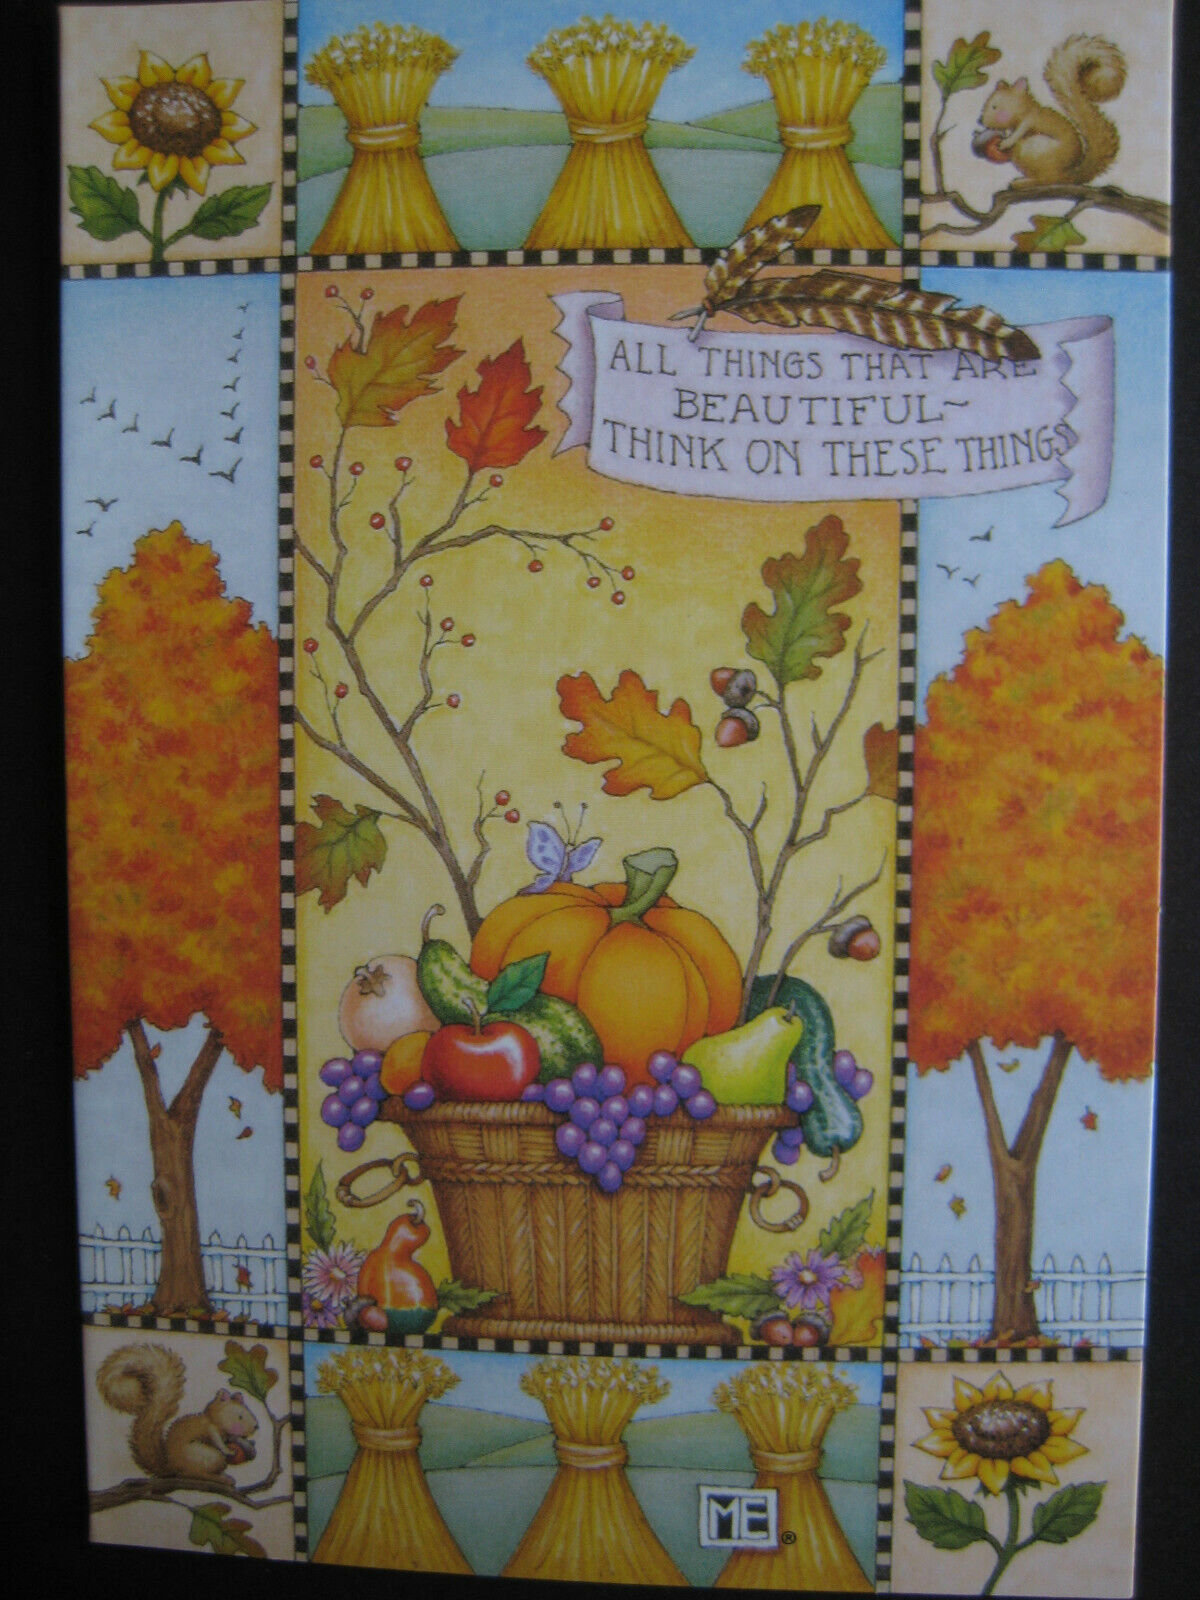  UNUSED vintage greeting card Mary Engelbreit AUTUMN All Things That R Beautiful